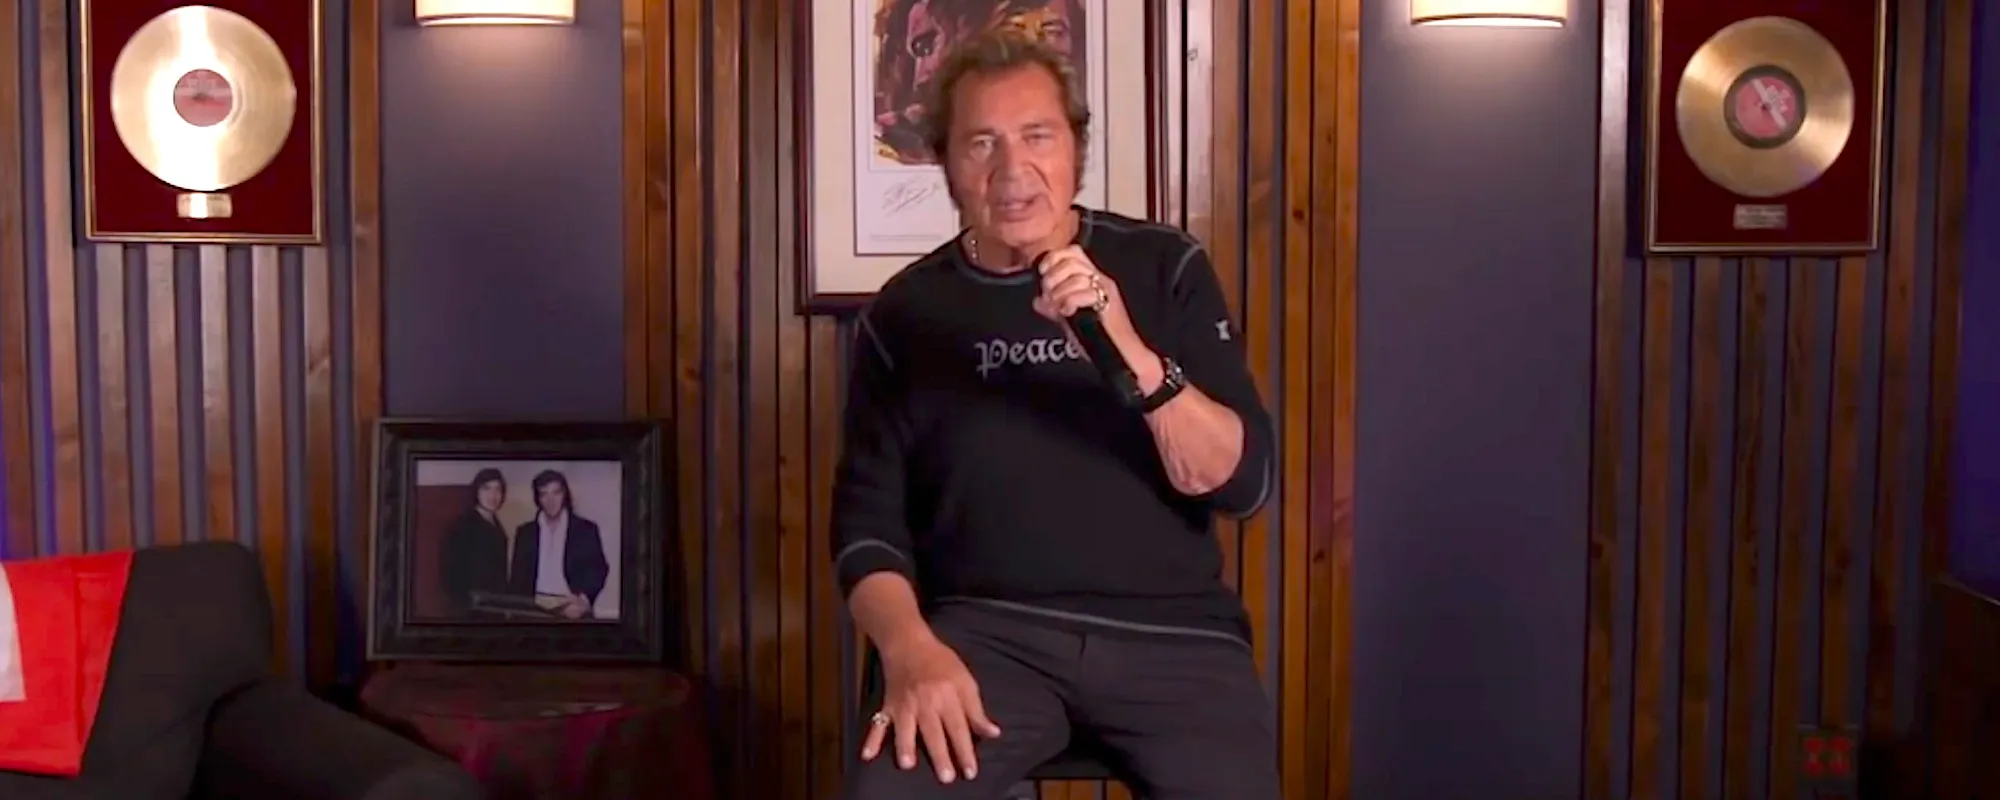 Engelbert Humperdinck  Gives His ‘Regards’ with Covers of Willie Nelson, The Everly Brothers